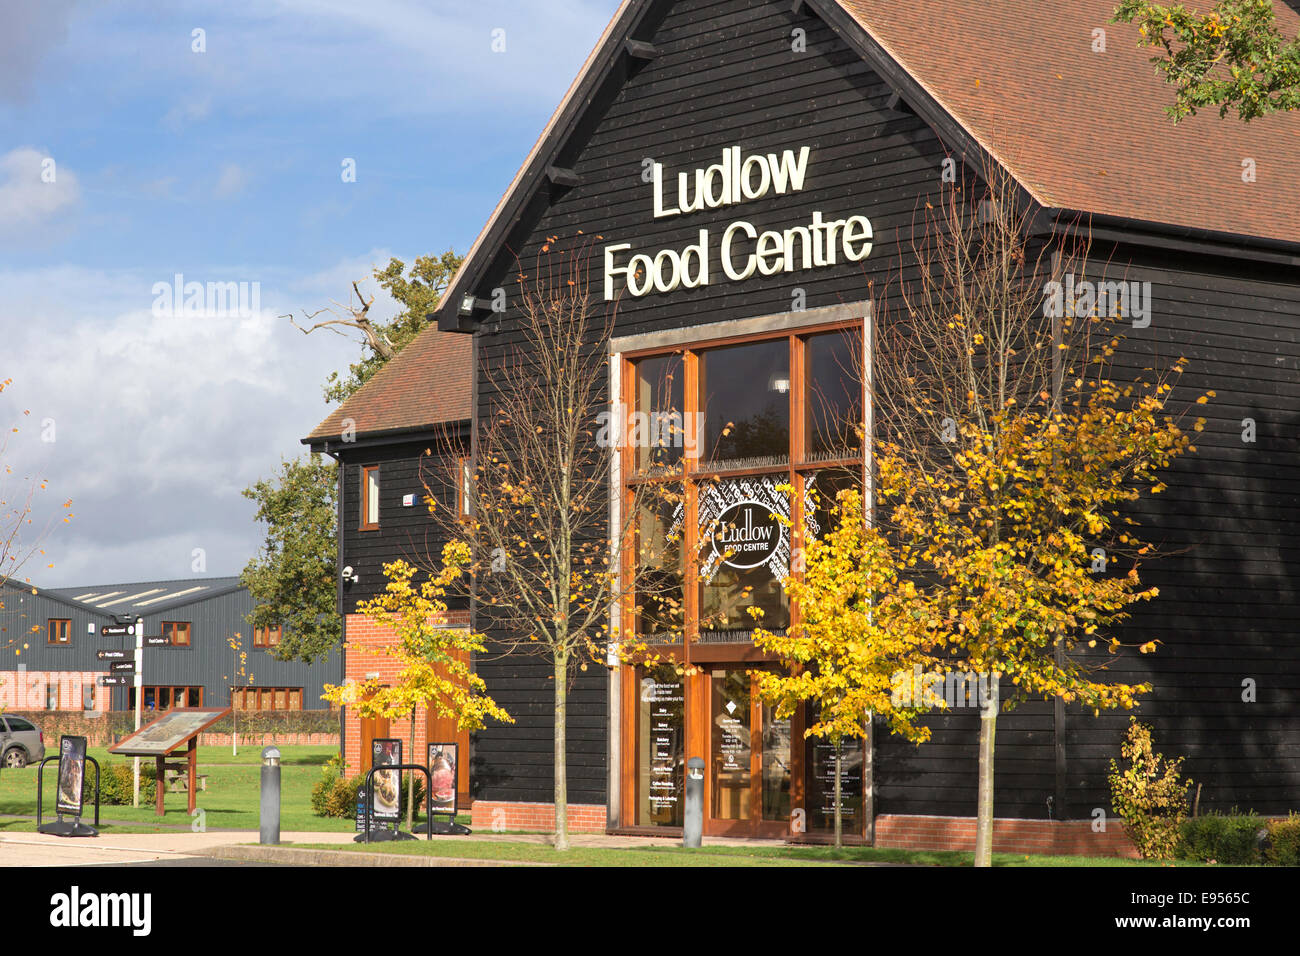 The Ludlow Food Centre, Bromfield near the market town of Ludlow, England, UK Stock Photo